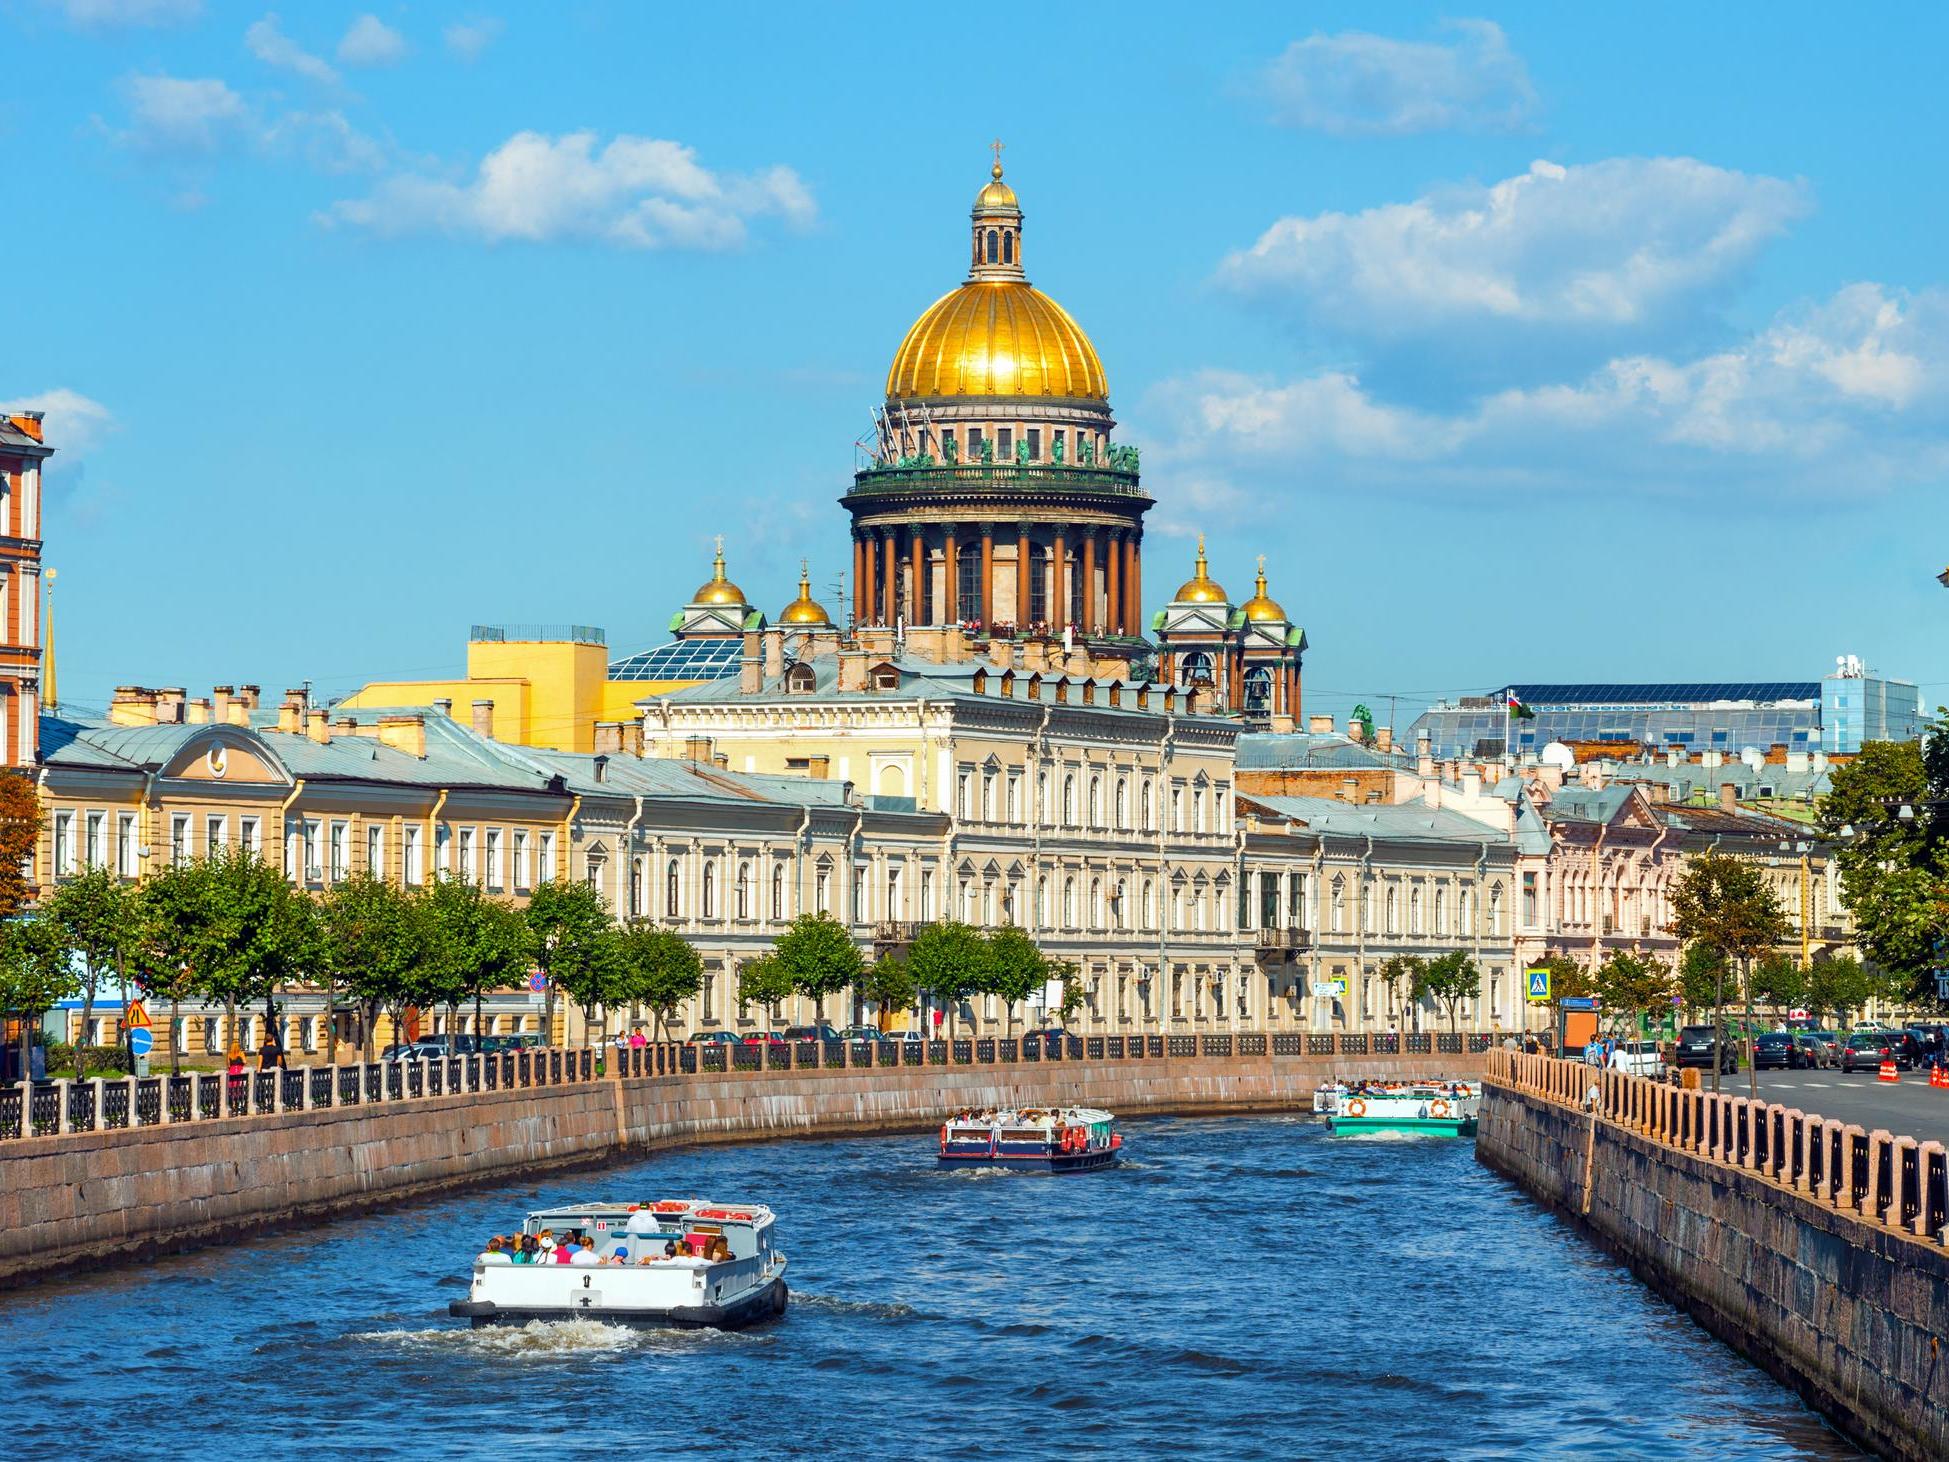 St Petersburg is the setting for Gogol’s novel about the lonely life of a big-city little man